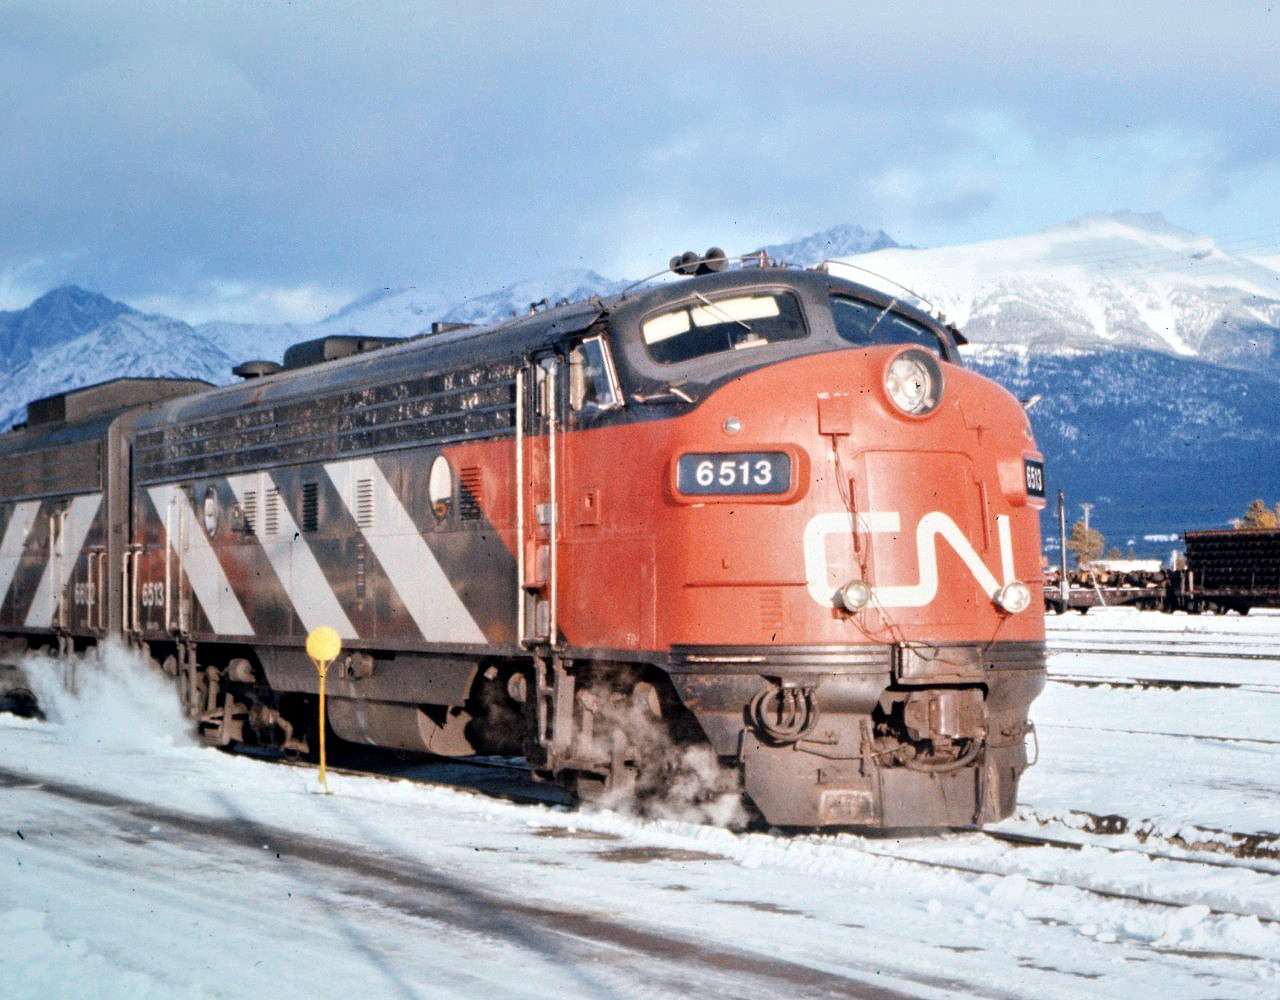 A classic profile! CN #1 The Super Continental has arrived in Jasper, AB on this frigid November day led by CN 6513. Snow on the ground and the mountains is giving passengers on board everything they expected and hoped for on this journey through the Rockies. I sure miss the sounds and smells of those steam heated consists. :-)